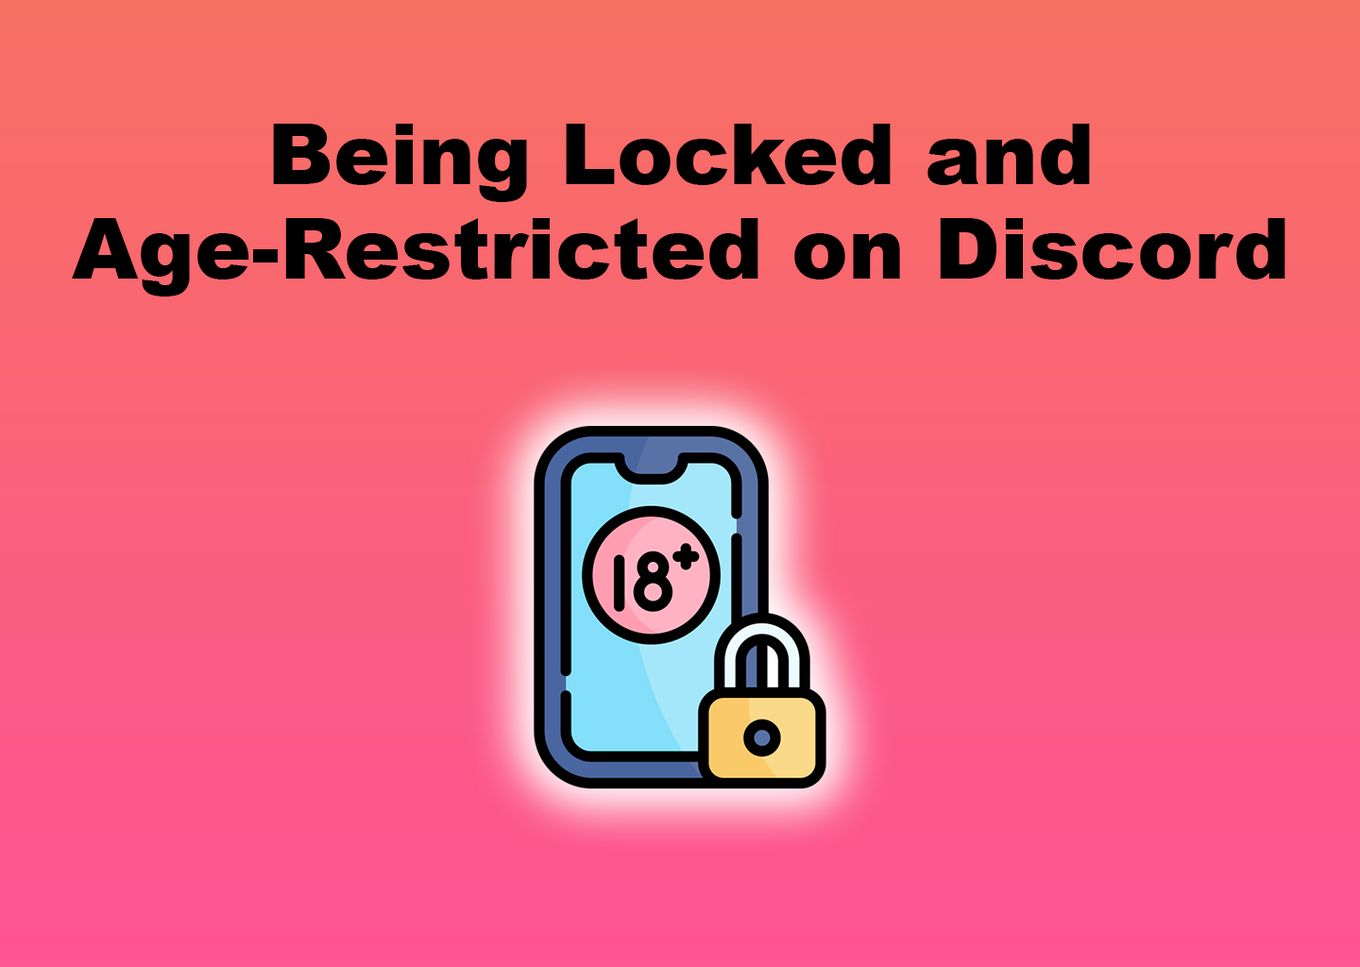 Being Locked and Age-Restricted on Discord